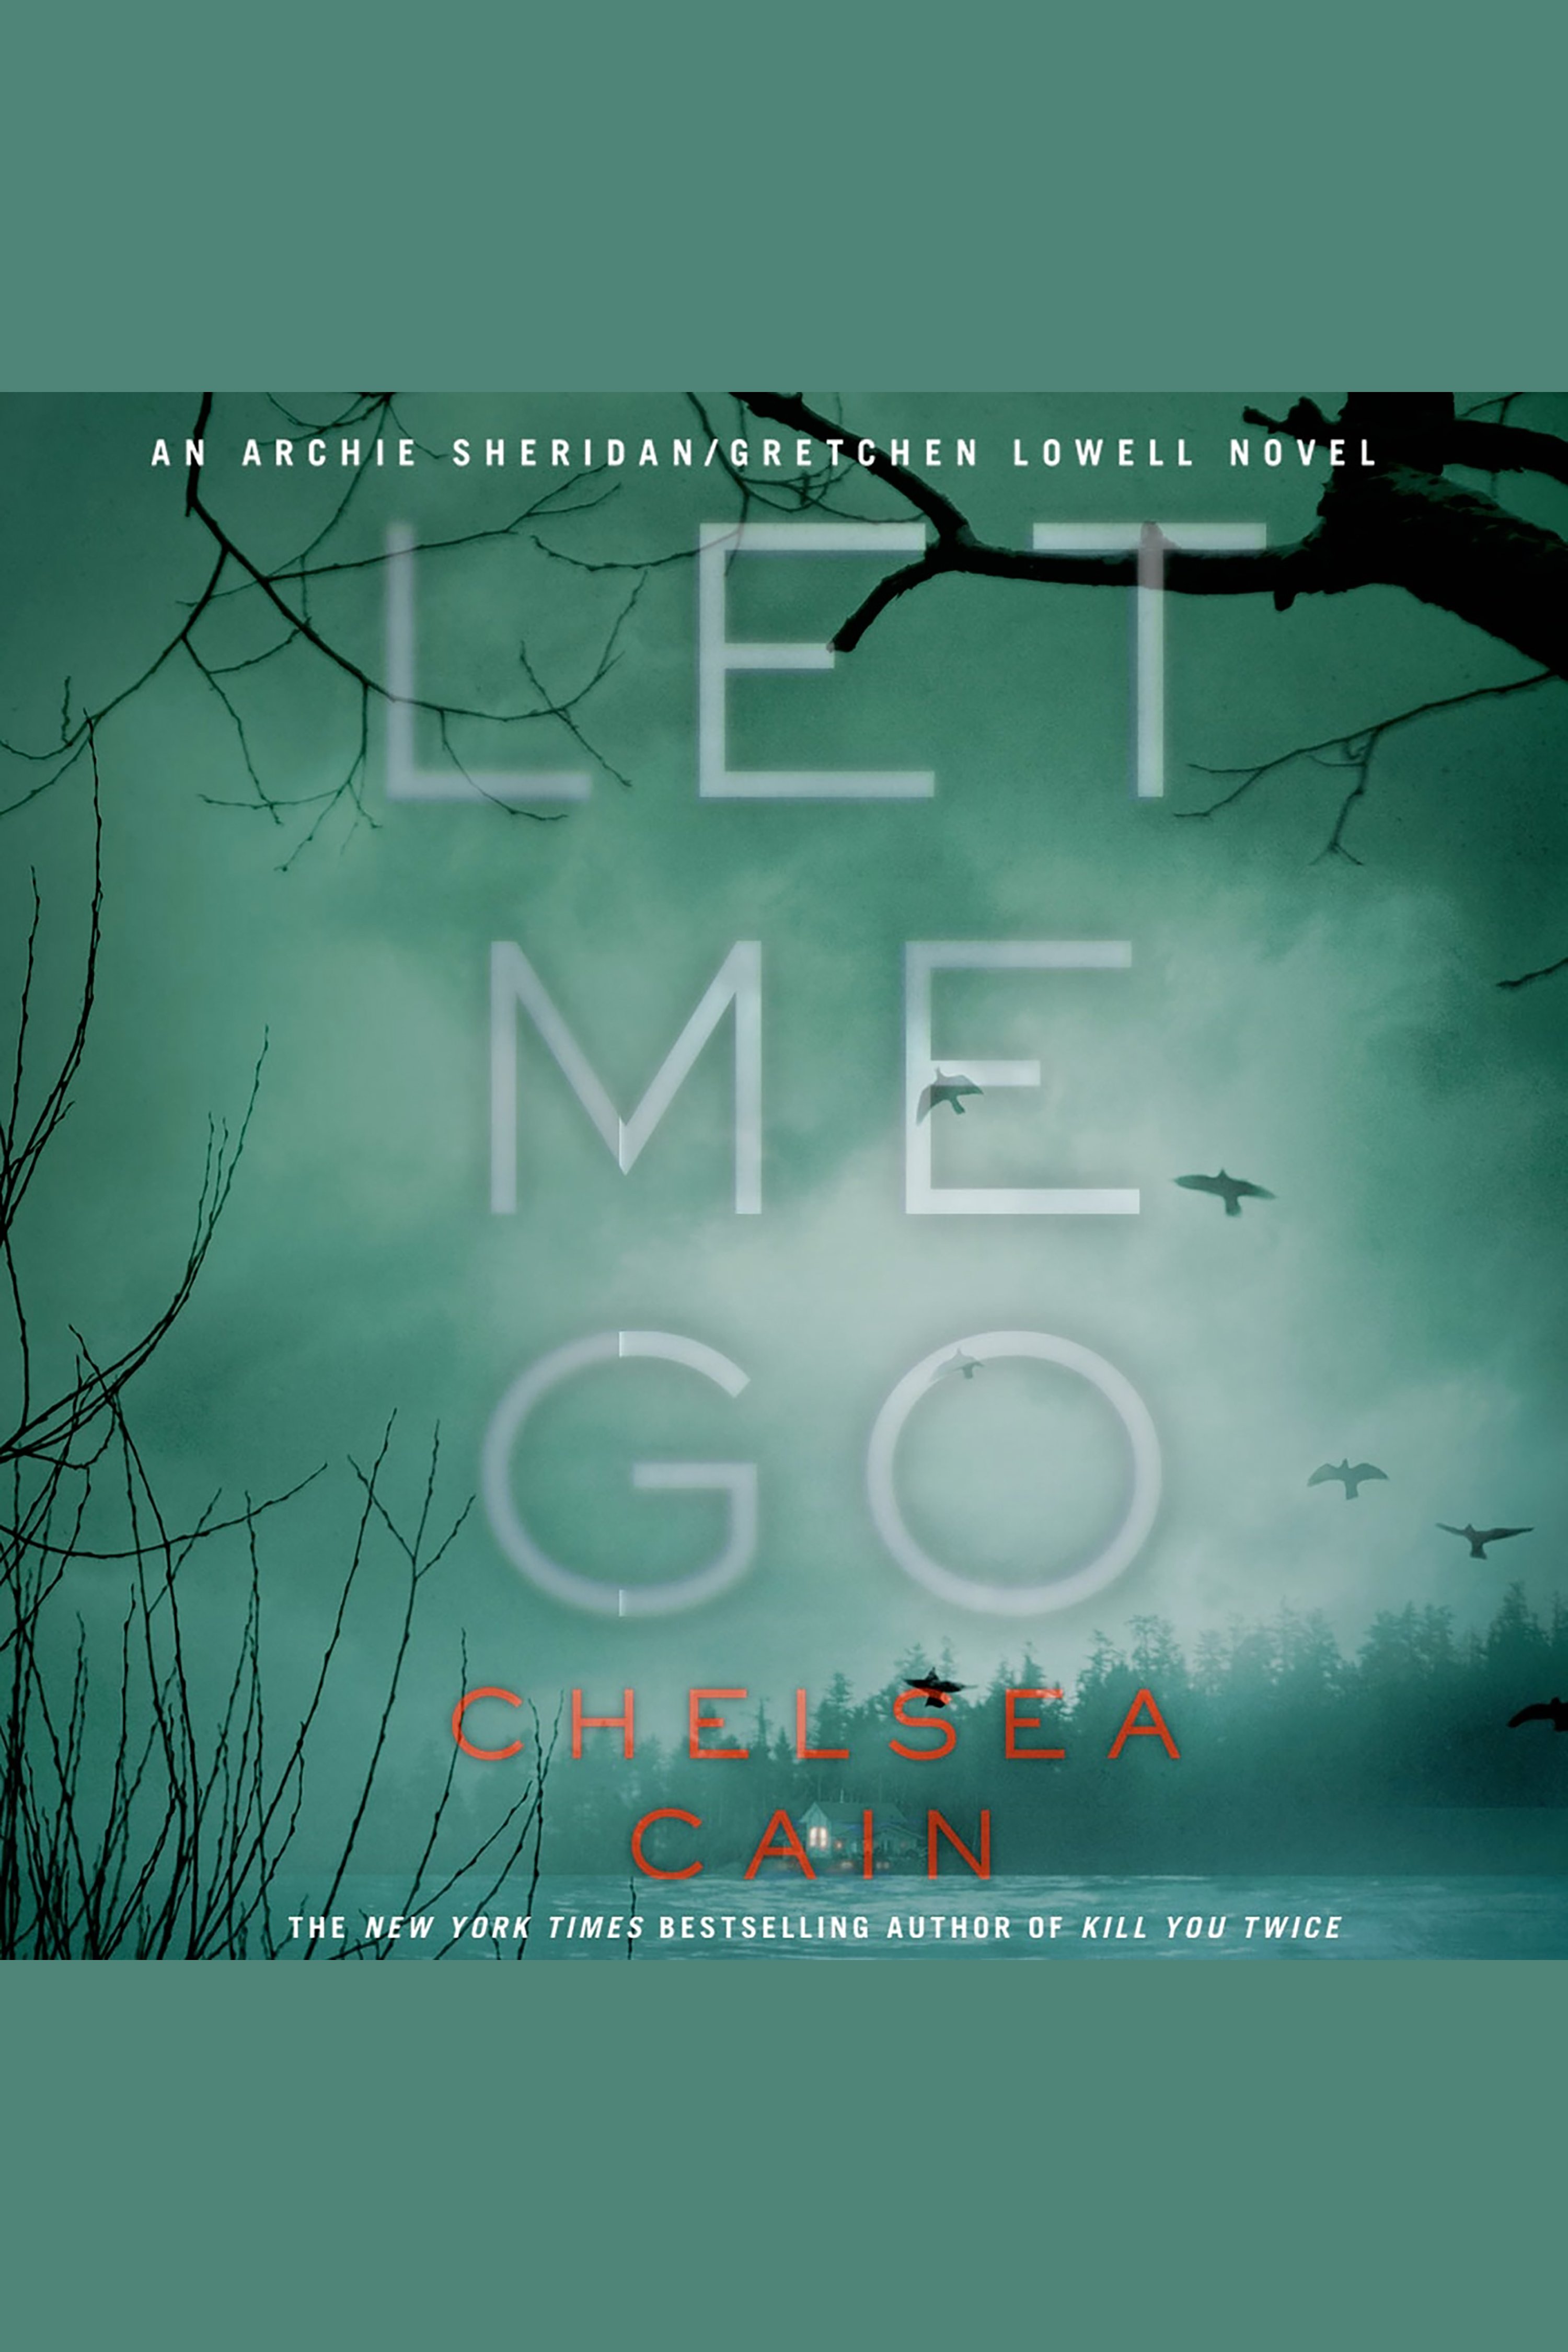 Let me go cover image